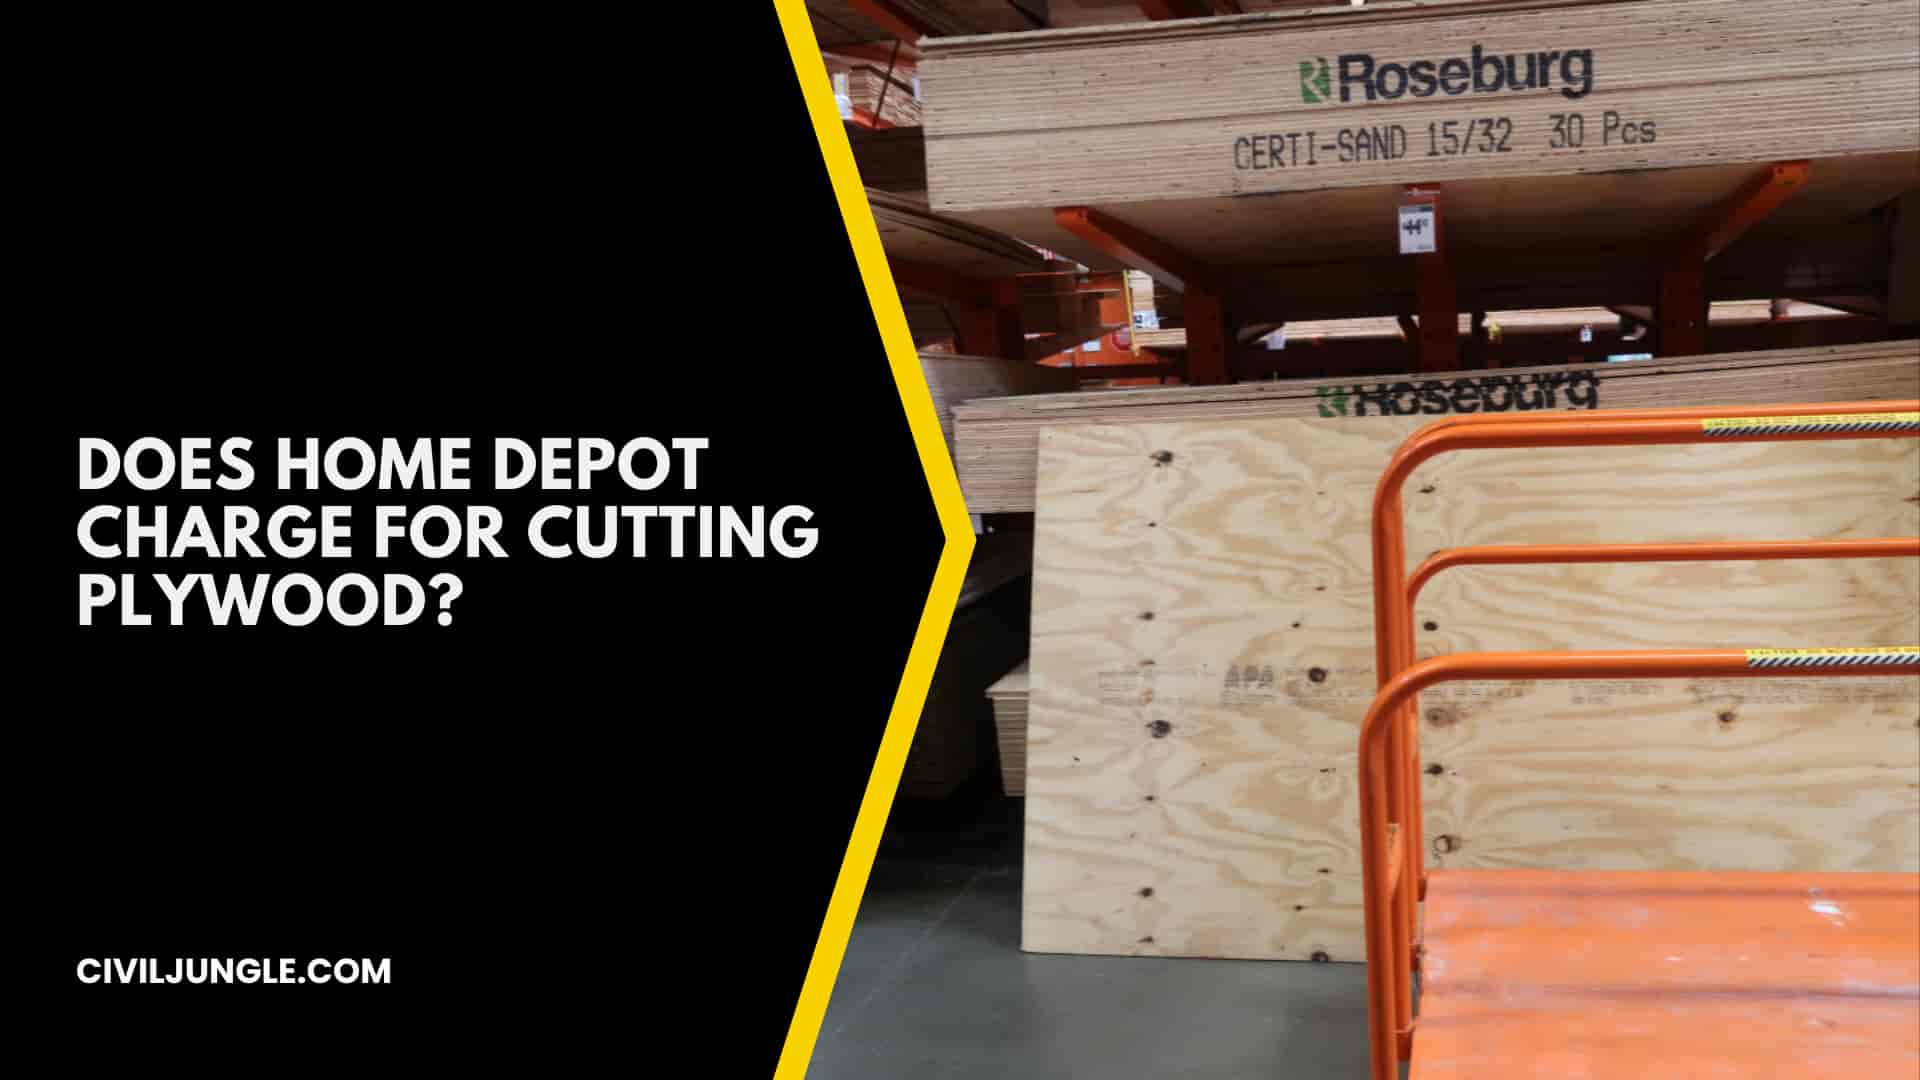 Does Home Depot Charge For Cutting Plywood?